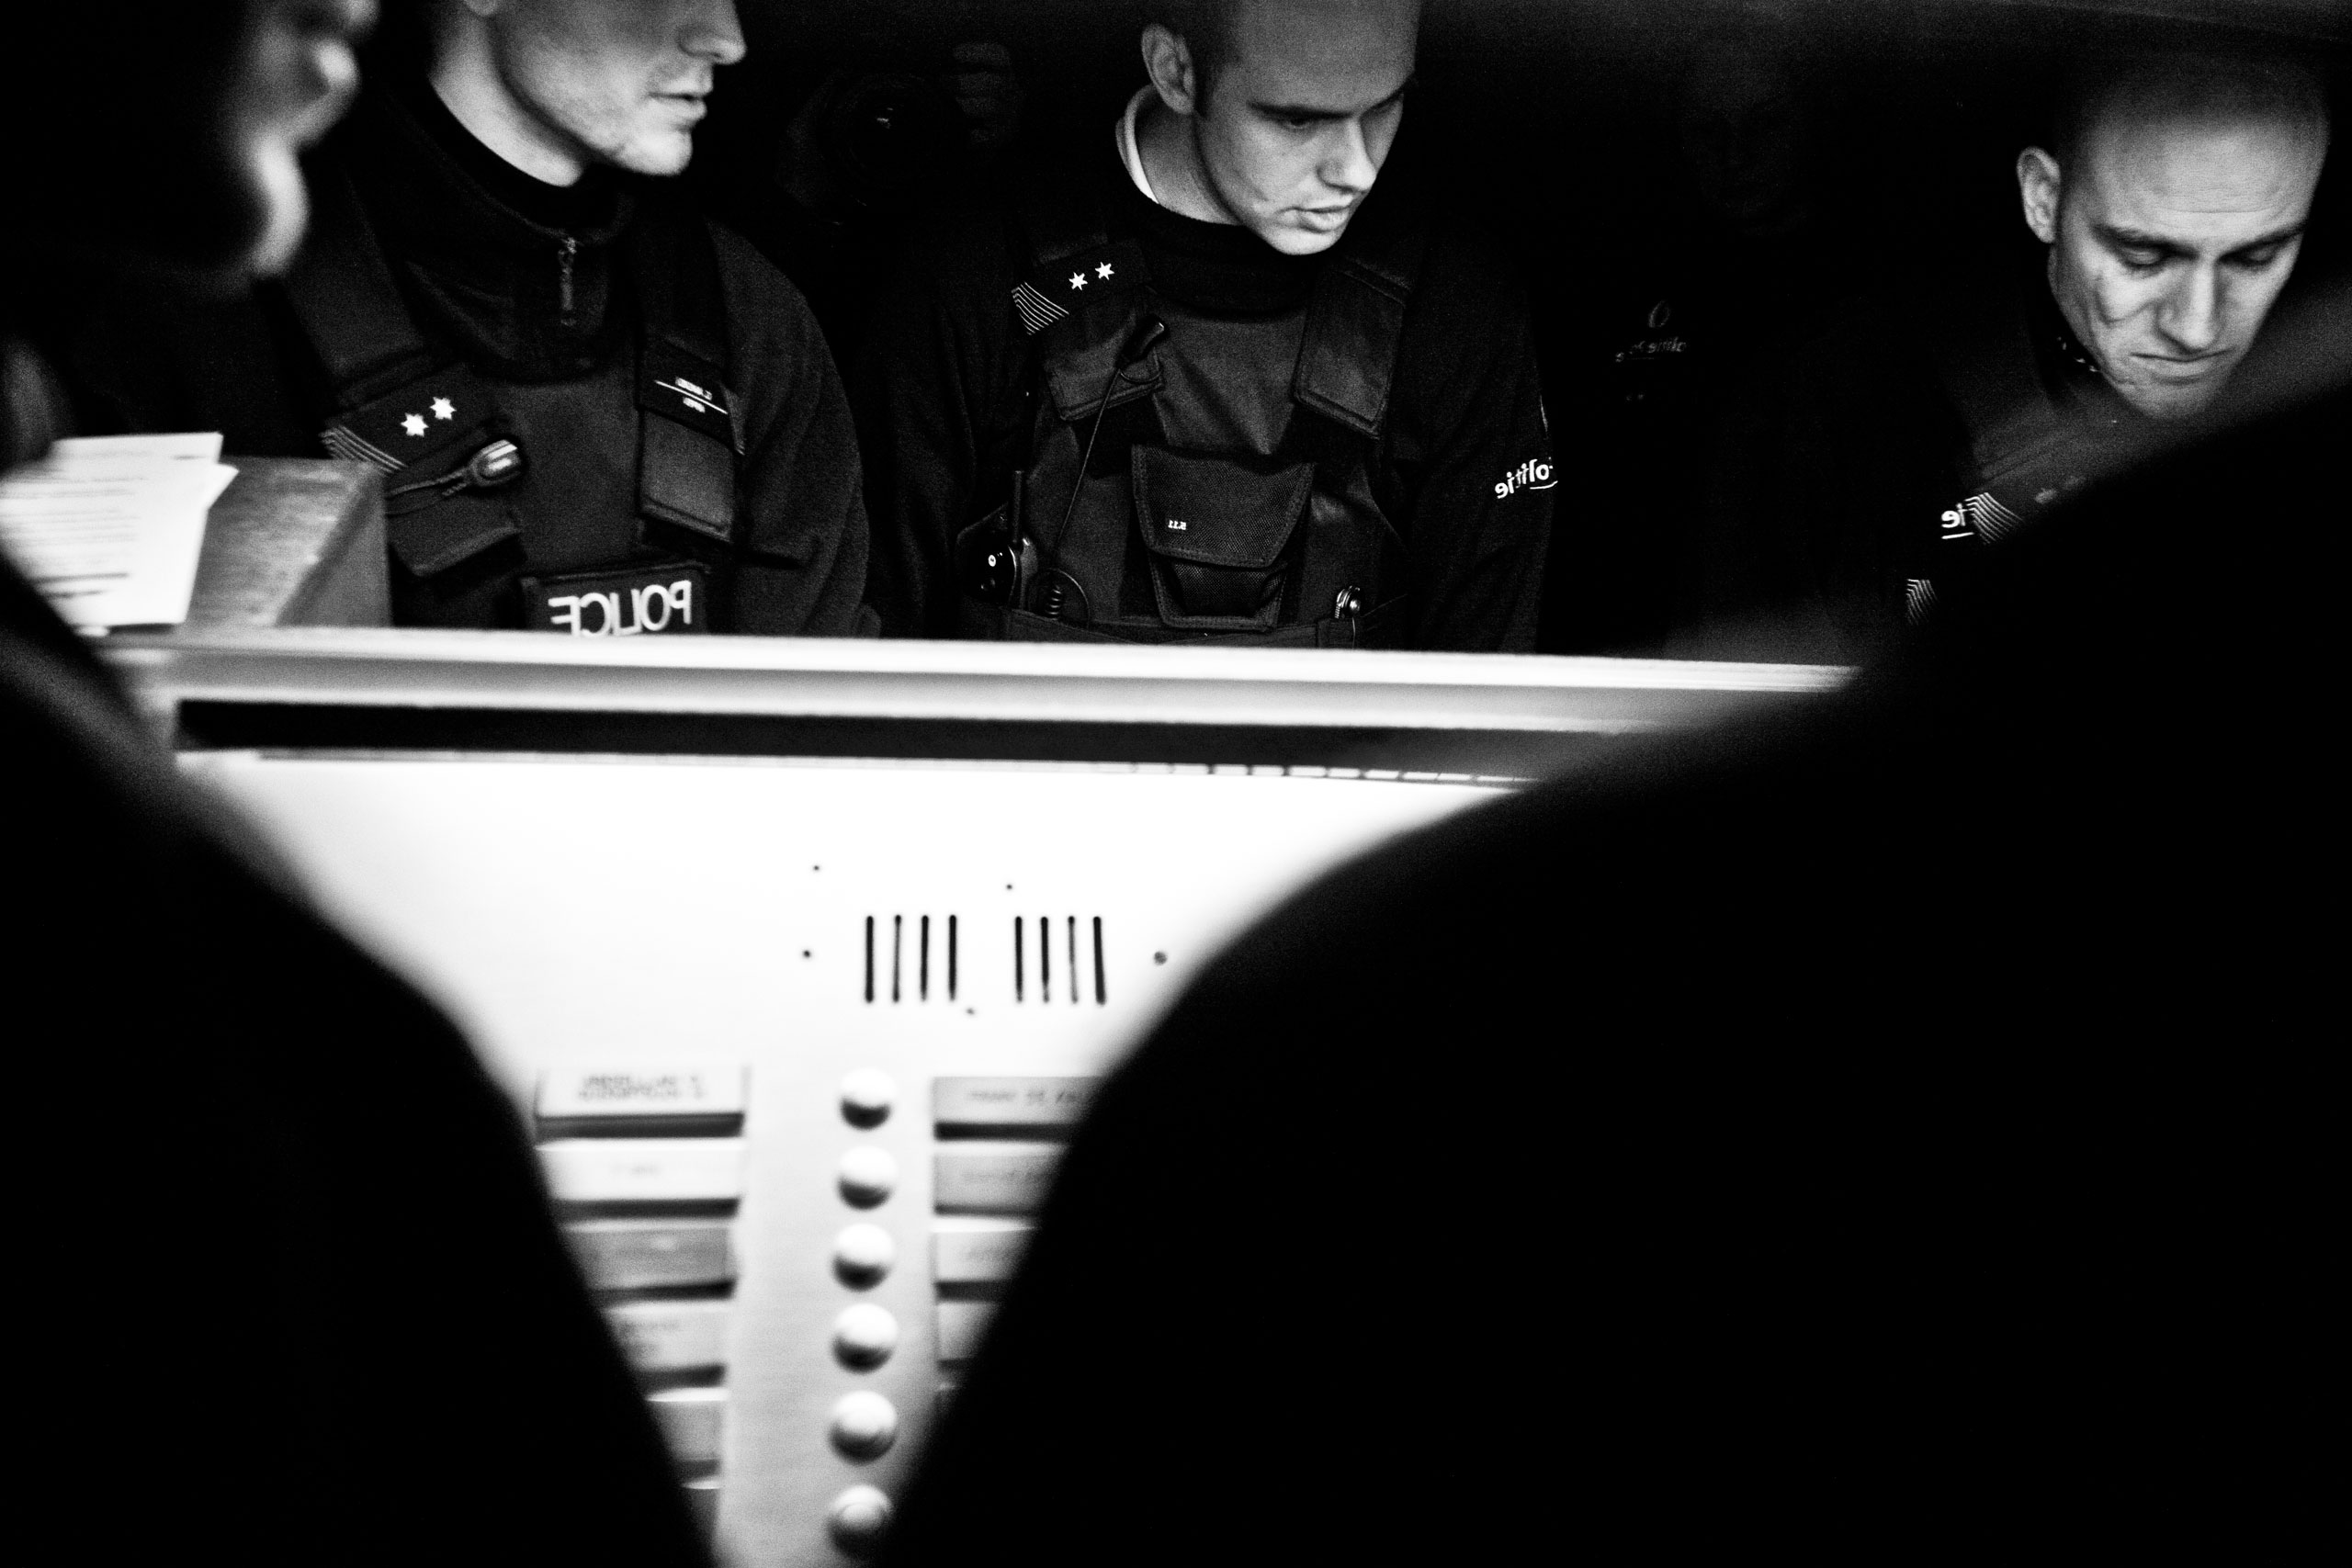 Policemen search apartment numbers on the intercom of a building in Molenbeek, Brussels, Belgium on Feb 1, 2010.